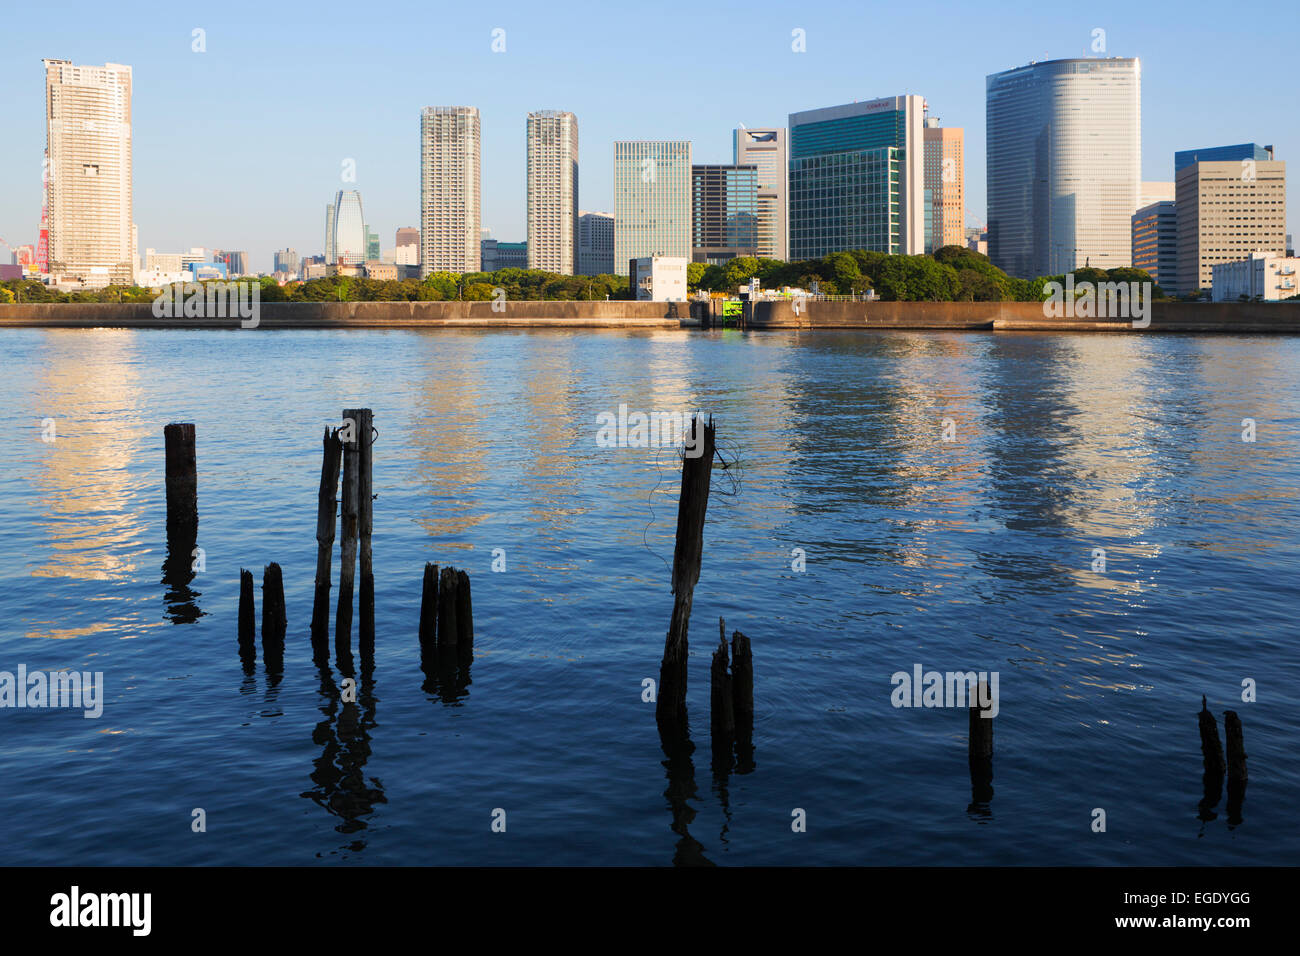 View over Sumida River of skyscrapers, Tokyo, Japan Stock Photo